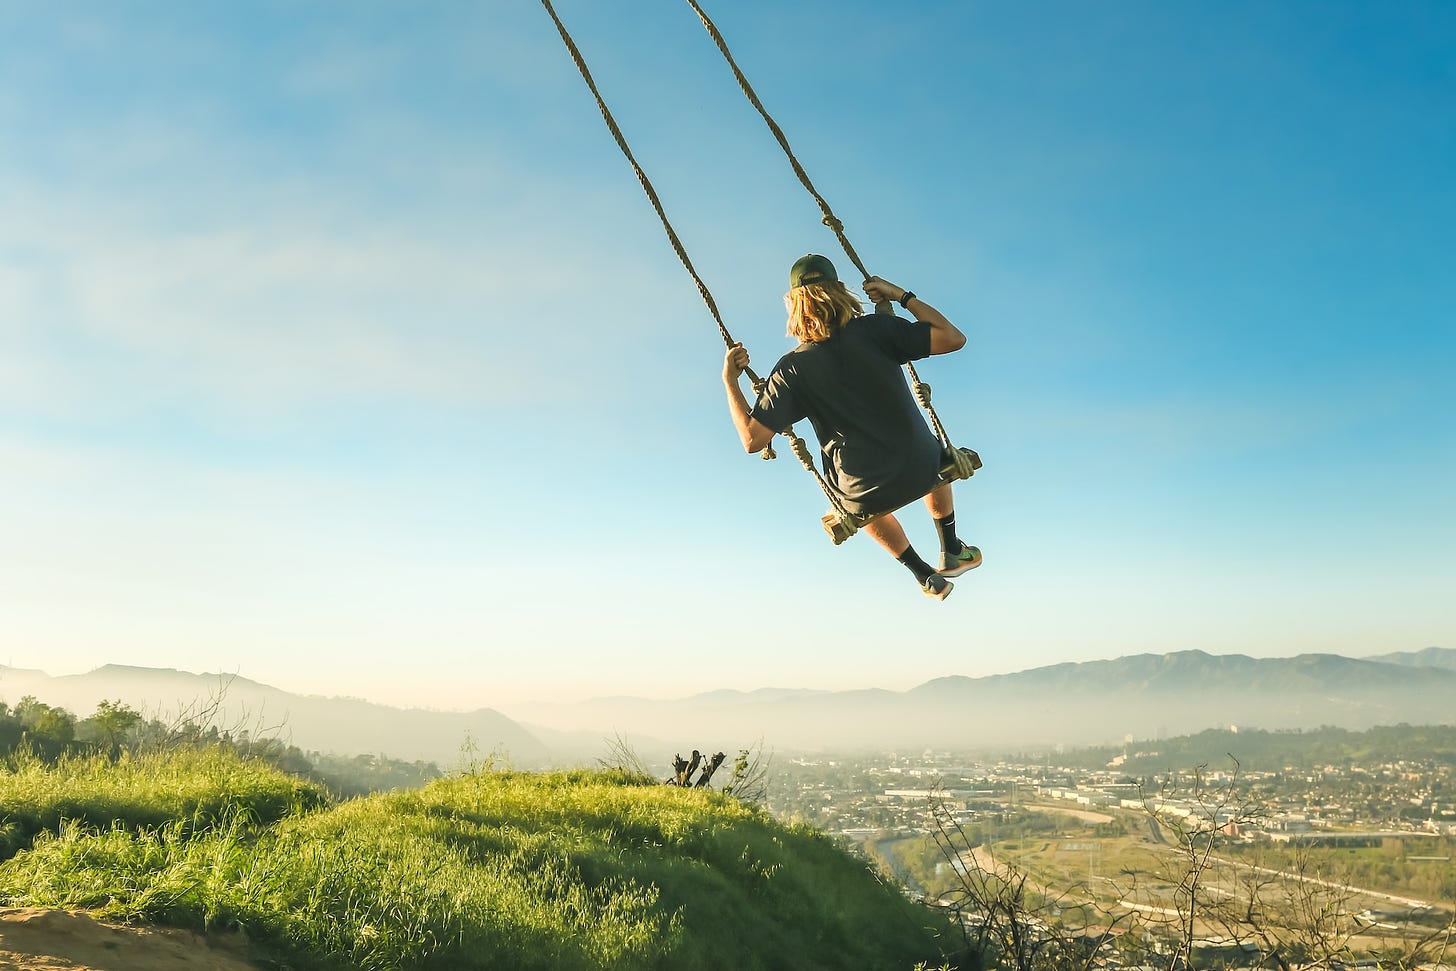 A person in a swing high above the landscape.